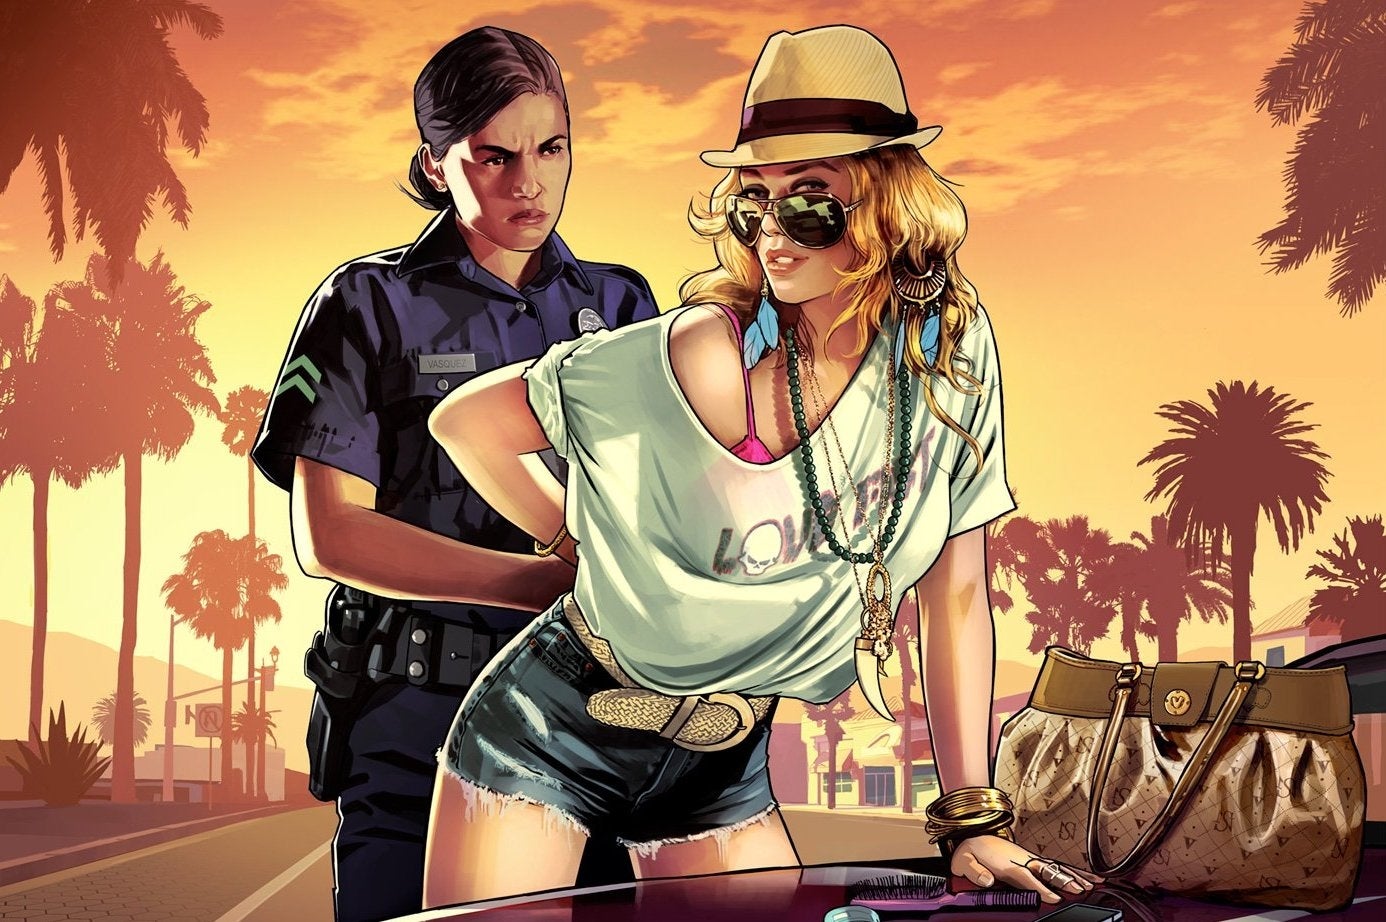 Image for Video: What's new in GTA 5 next gen?